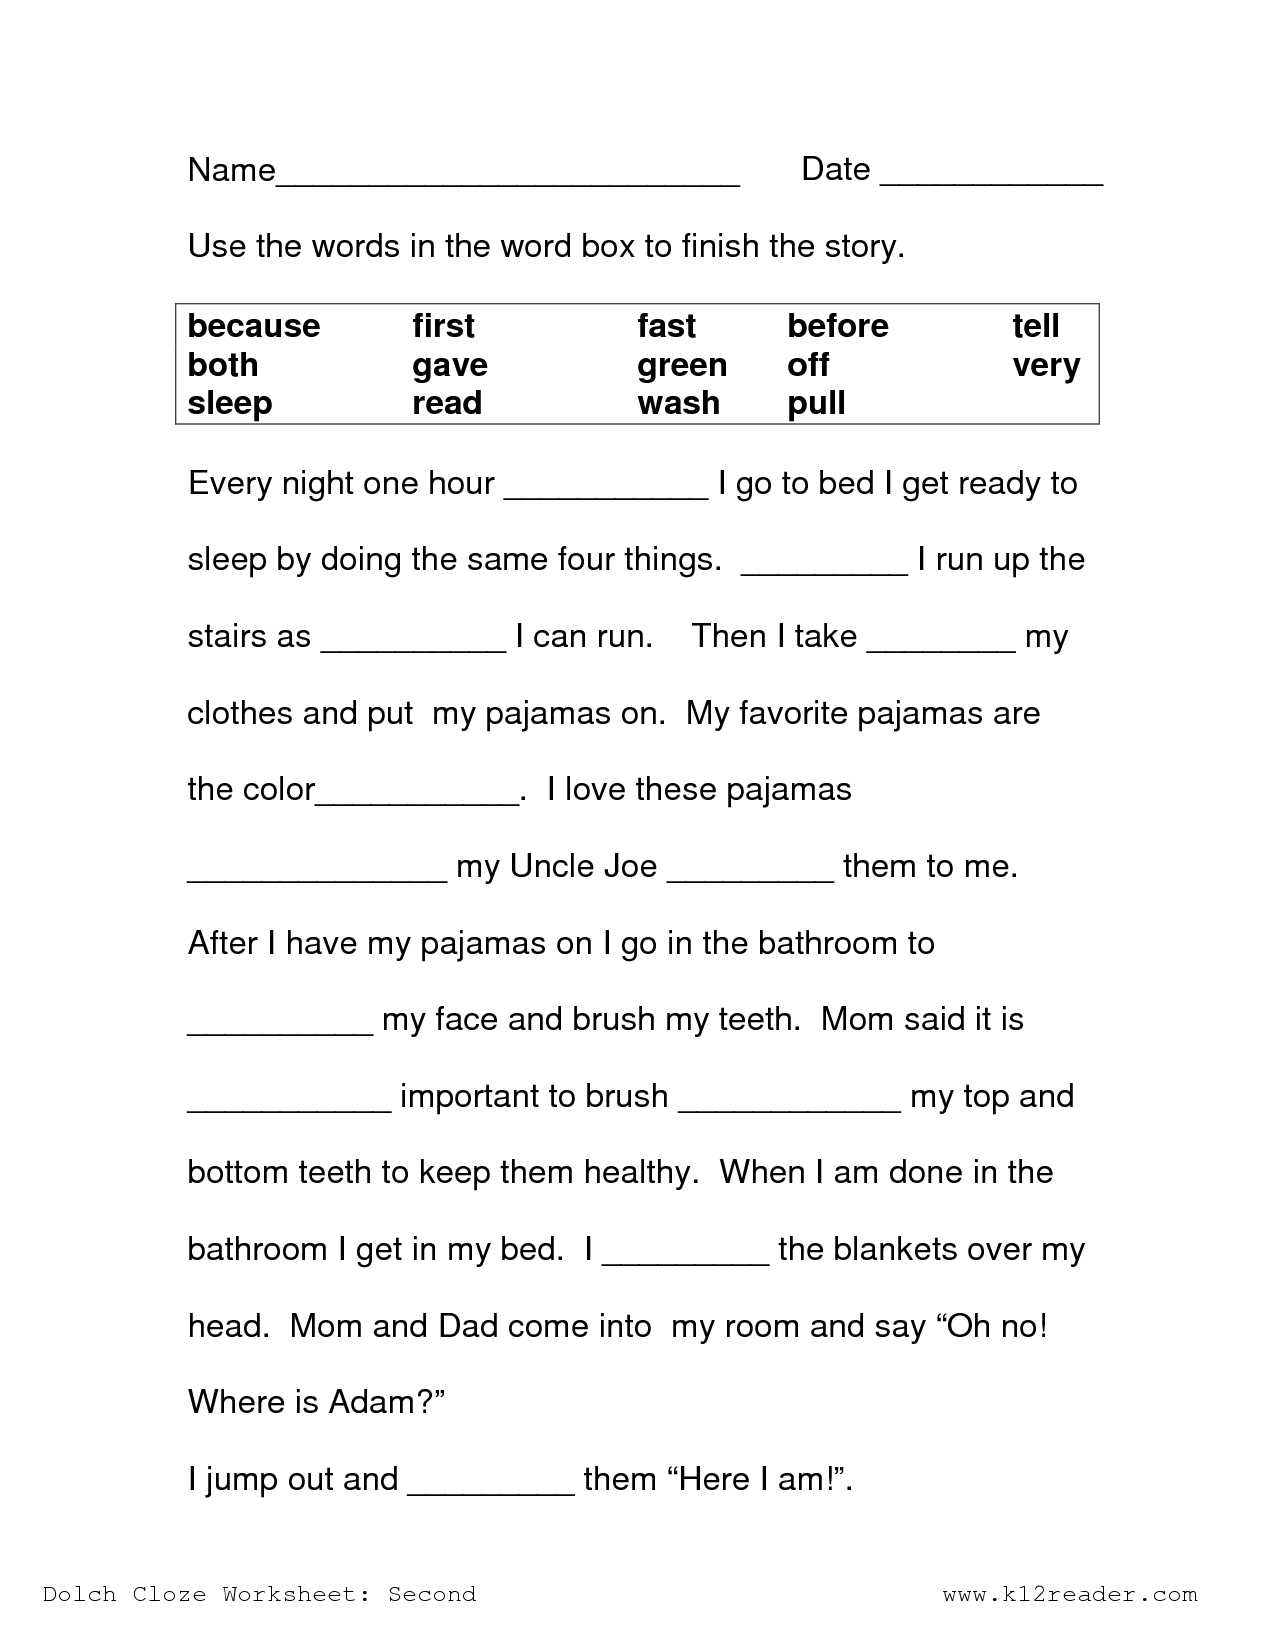 Simple Compound and Complex Sentences Worksheet Pdf with Answers Along with Middle School Reading Prehension Worksheets Pdf the Best